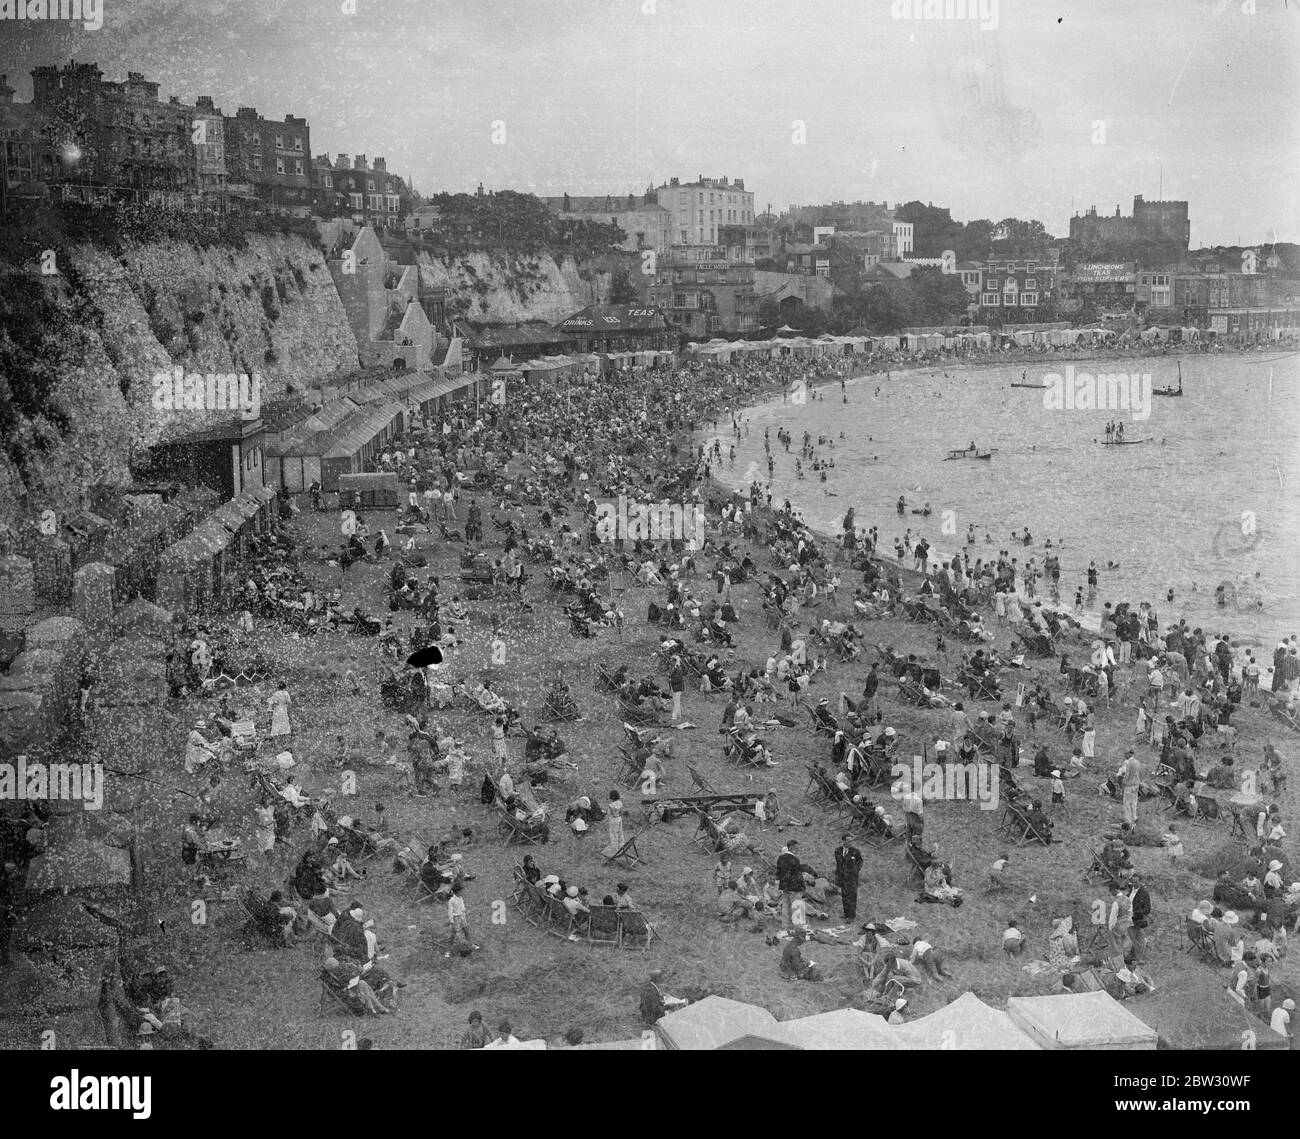 The king comes ashore at Cowes . Thousands of holidaymakers at Broadstairs enjoyed a perfect day on bank holiday . A view of the enormous crowd of holiday makers and bathers on the sands at Broadstairs on bank holiday . 1 August 1932 Stock Photo